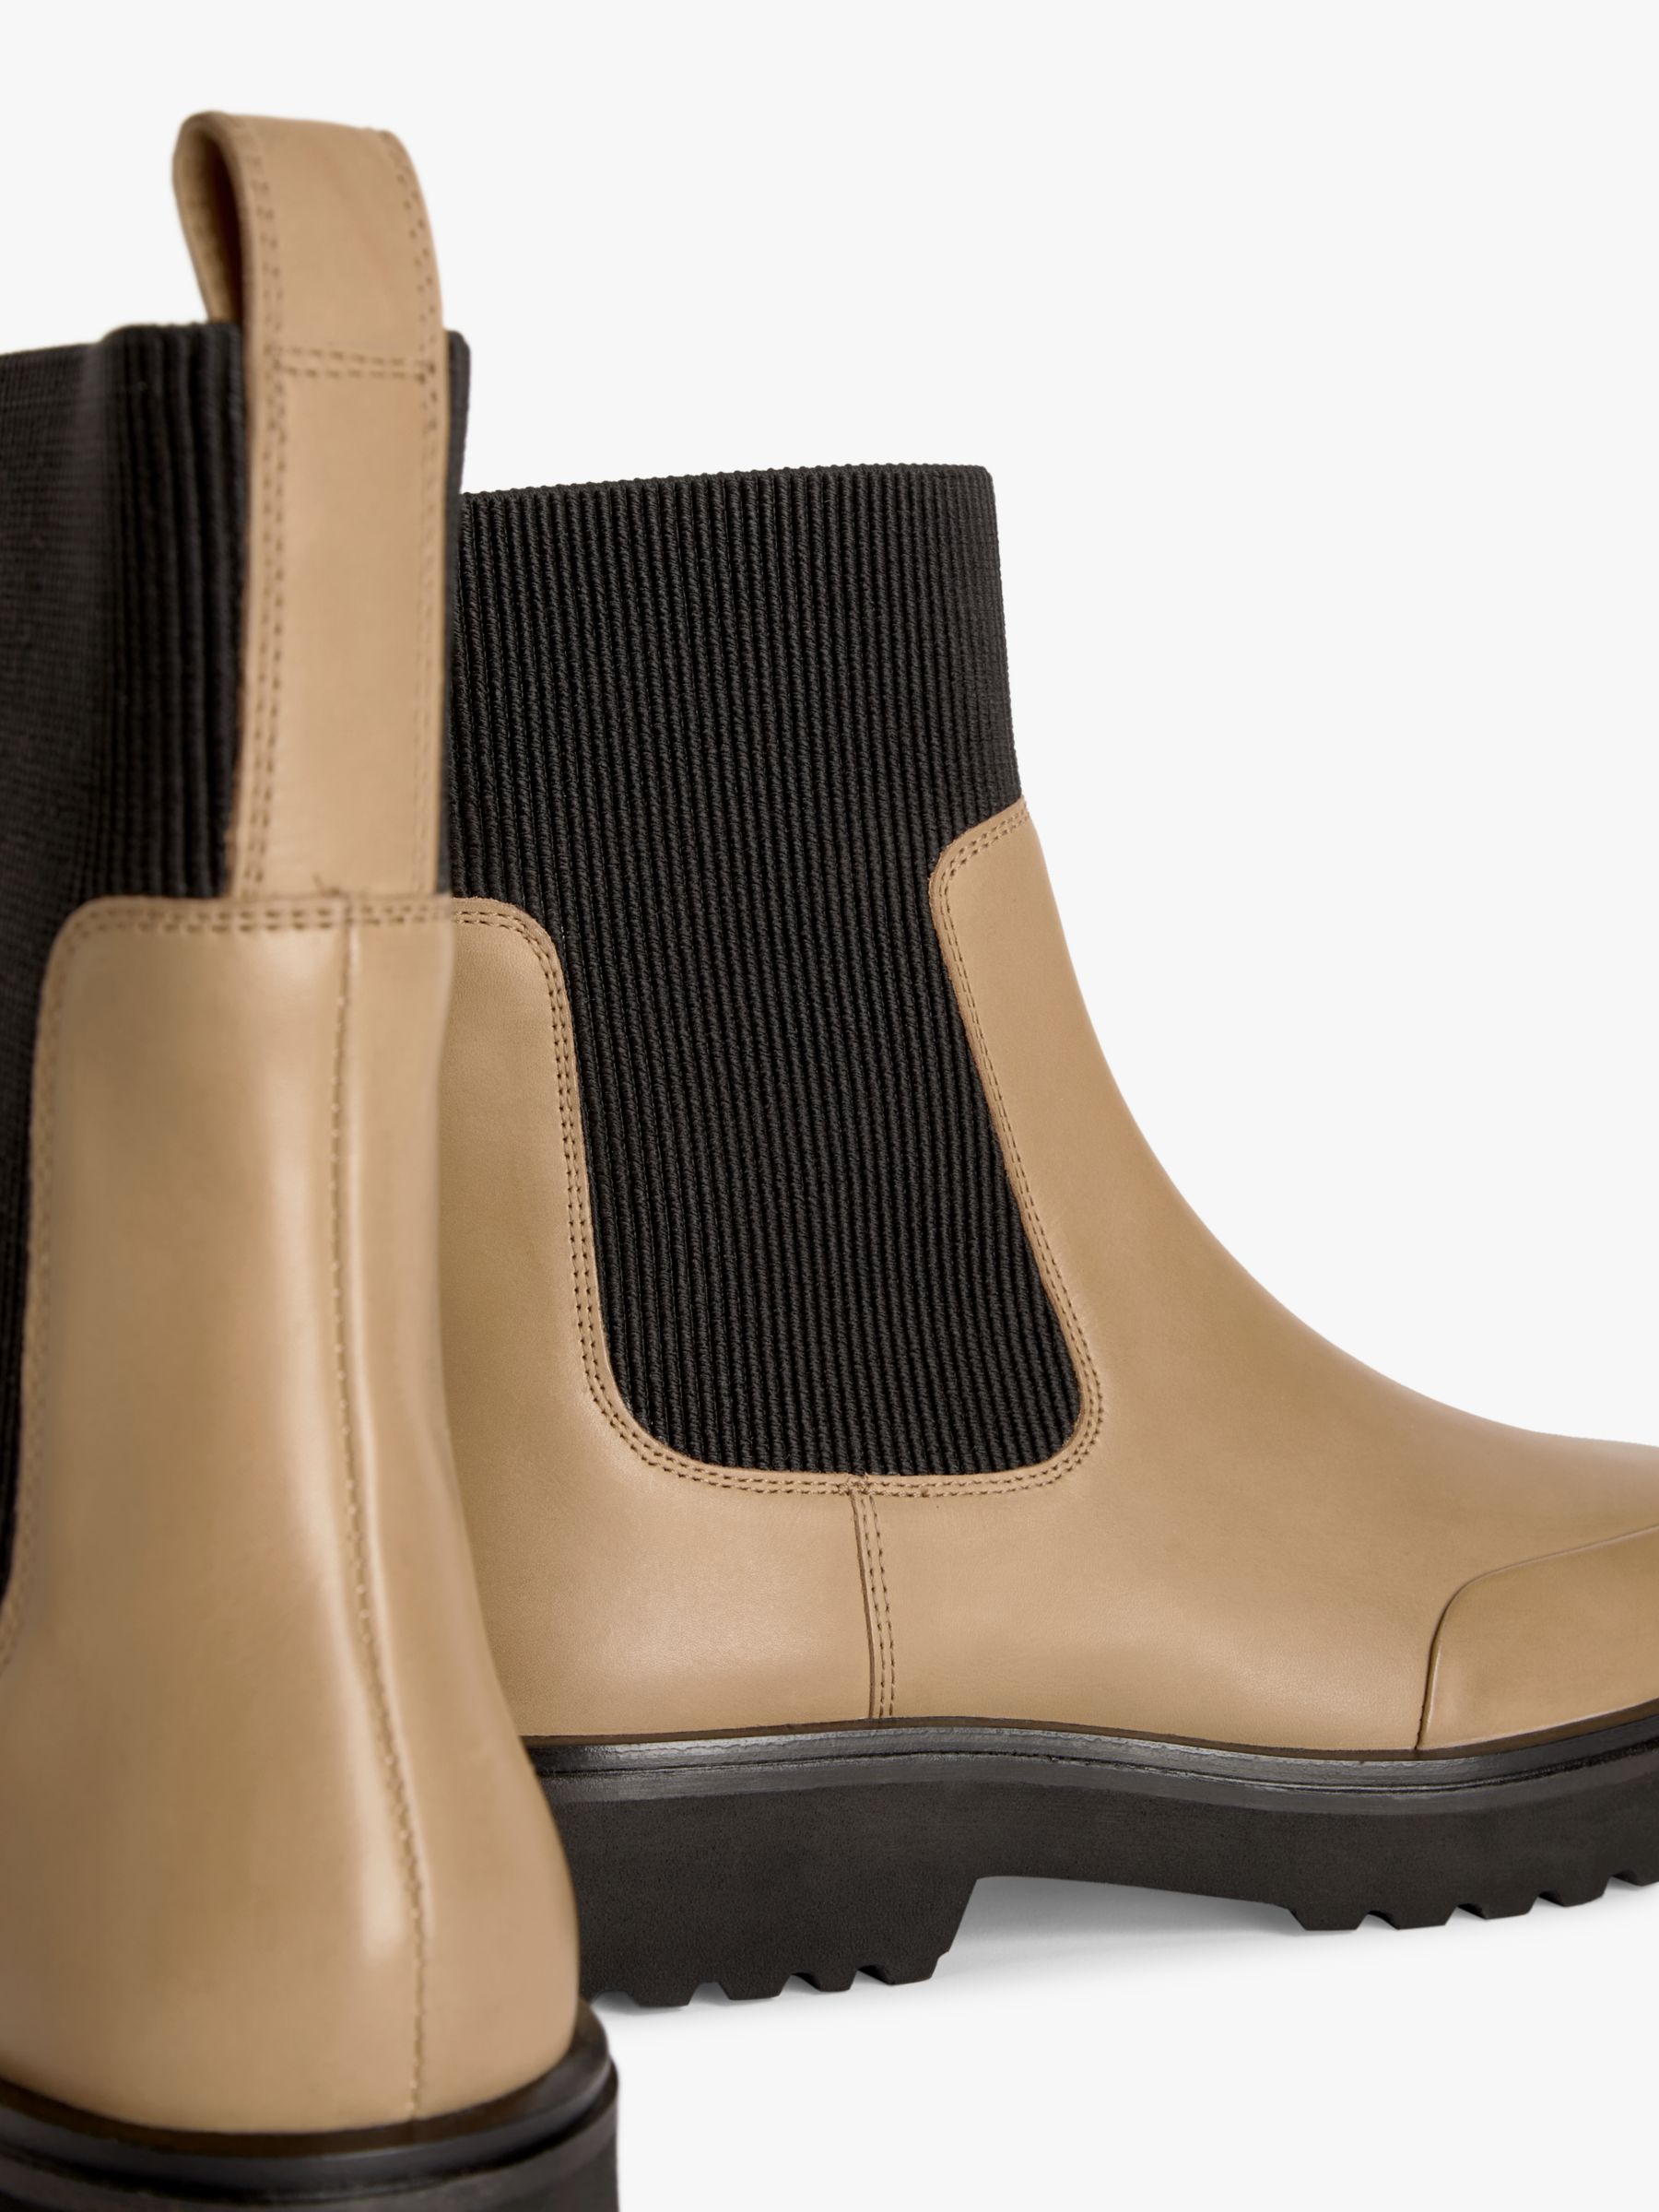 Buy John Lewis ANYDAY Purcie Leather Soft Elastic Chelsea Boots Online at johnlewis.com